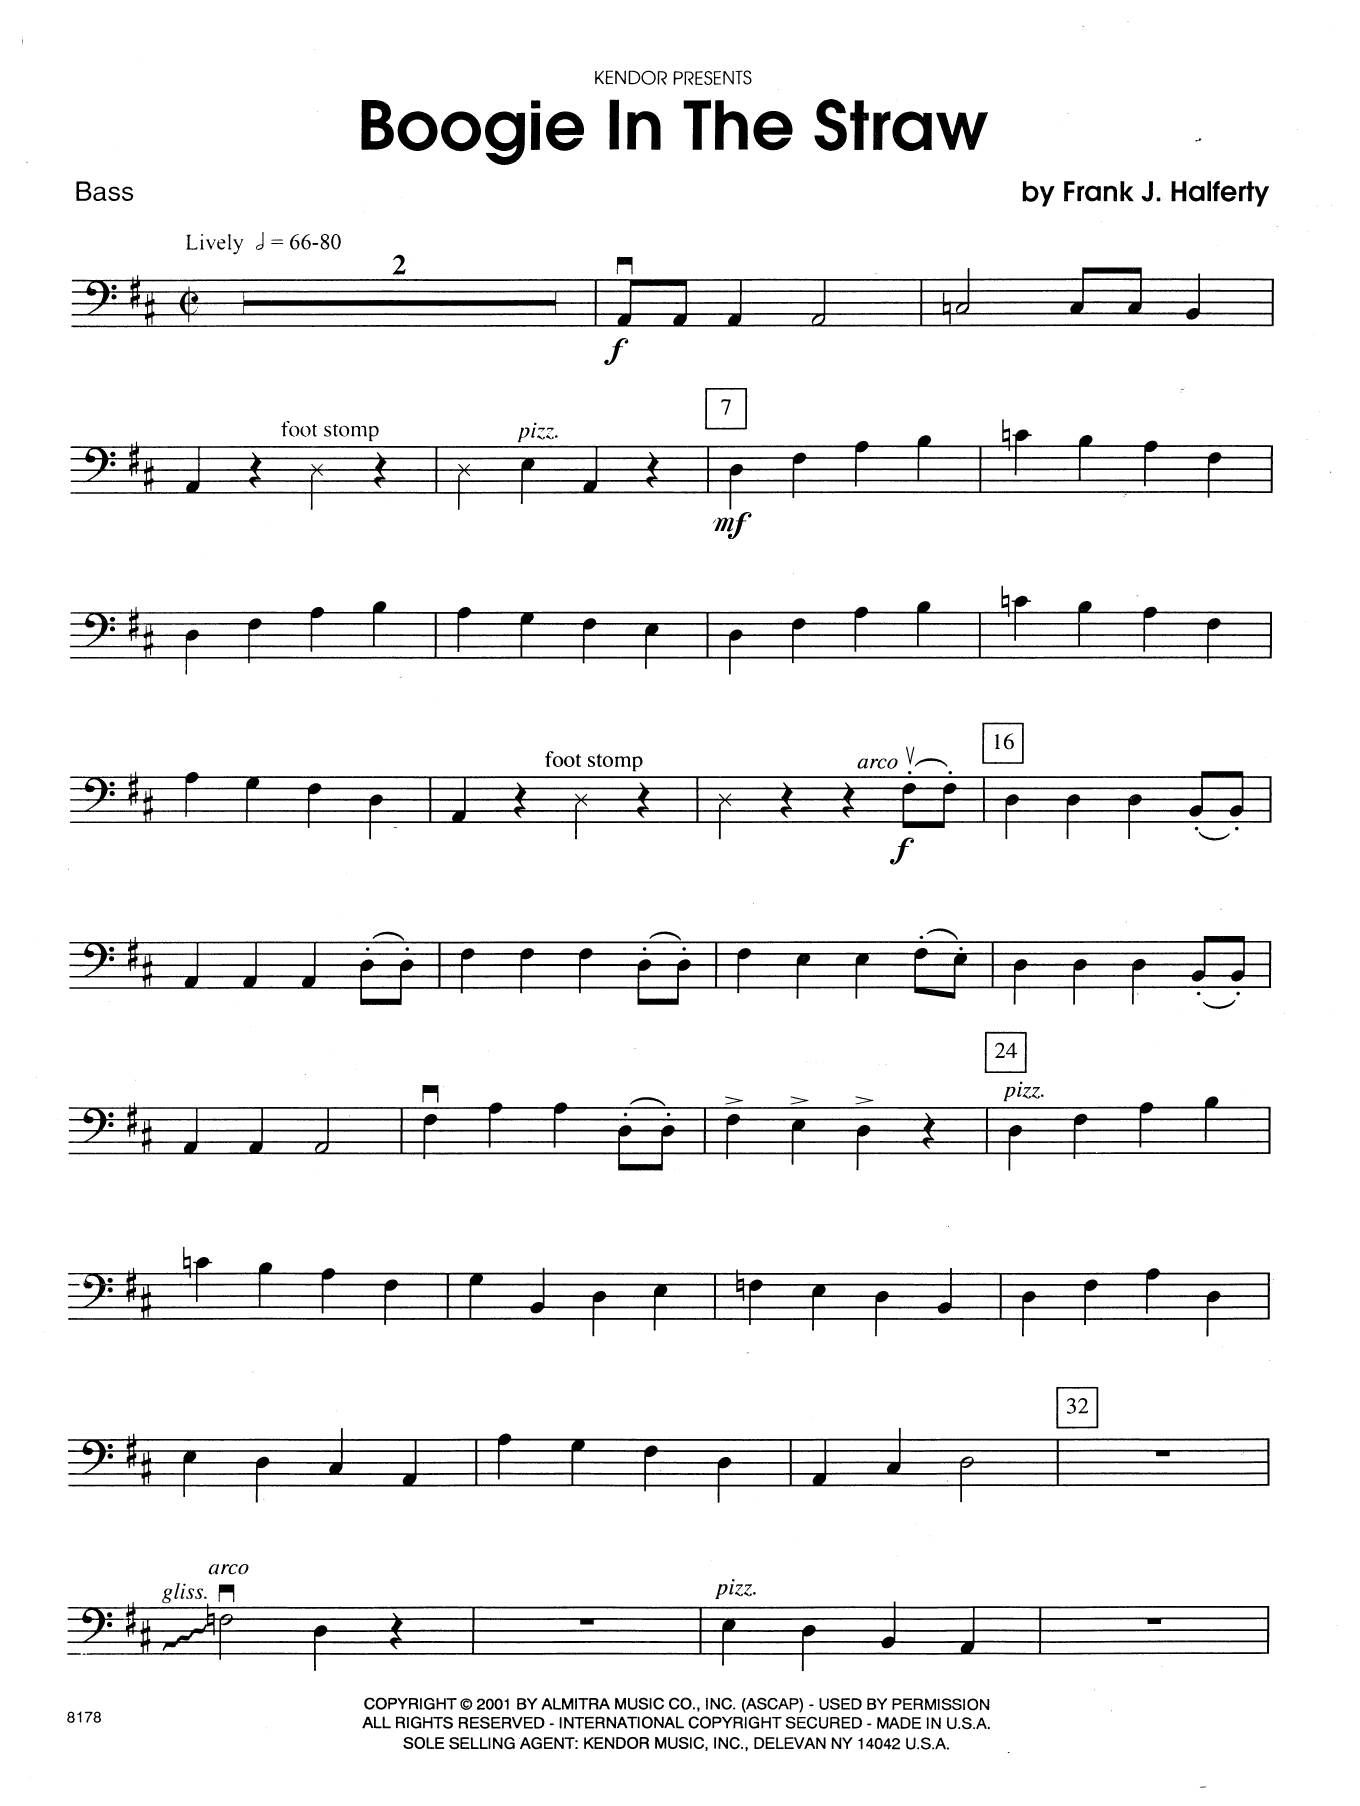 Frank J. Halferty Boogie In The Straw - Bass sheet music preview music notes and score for Orchestra including 2 page(s)